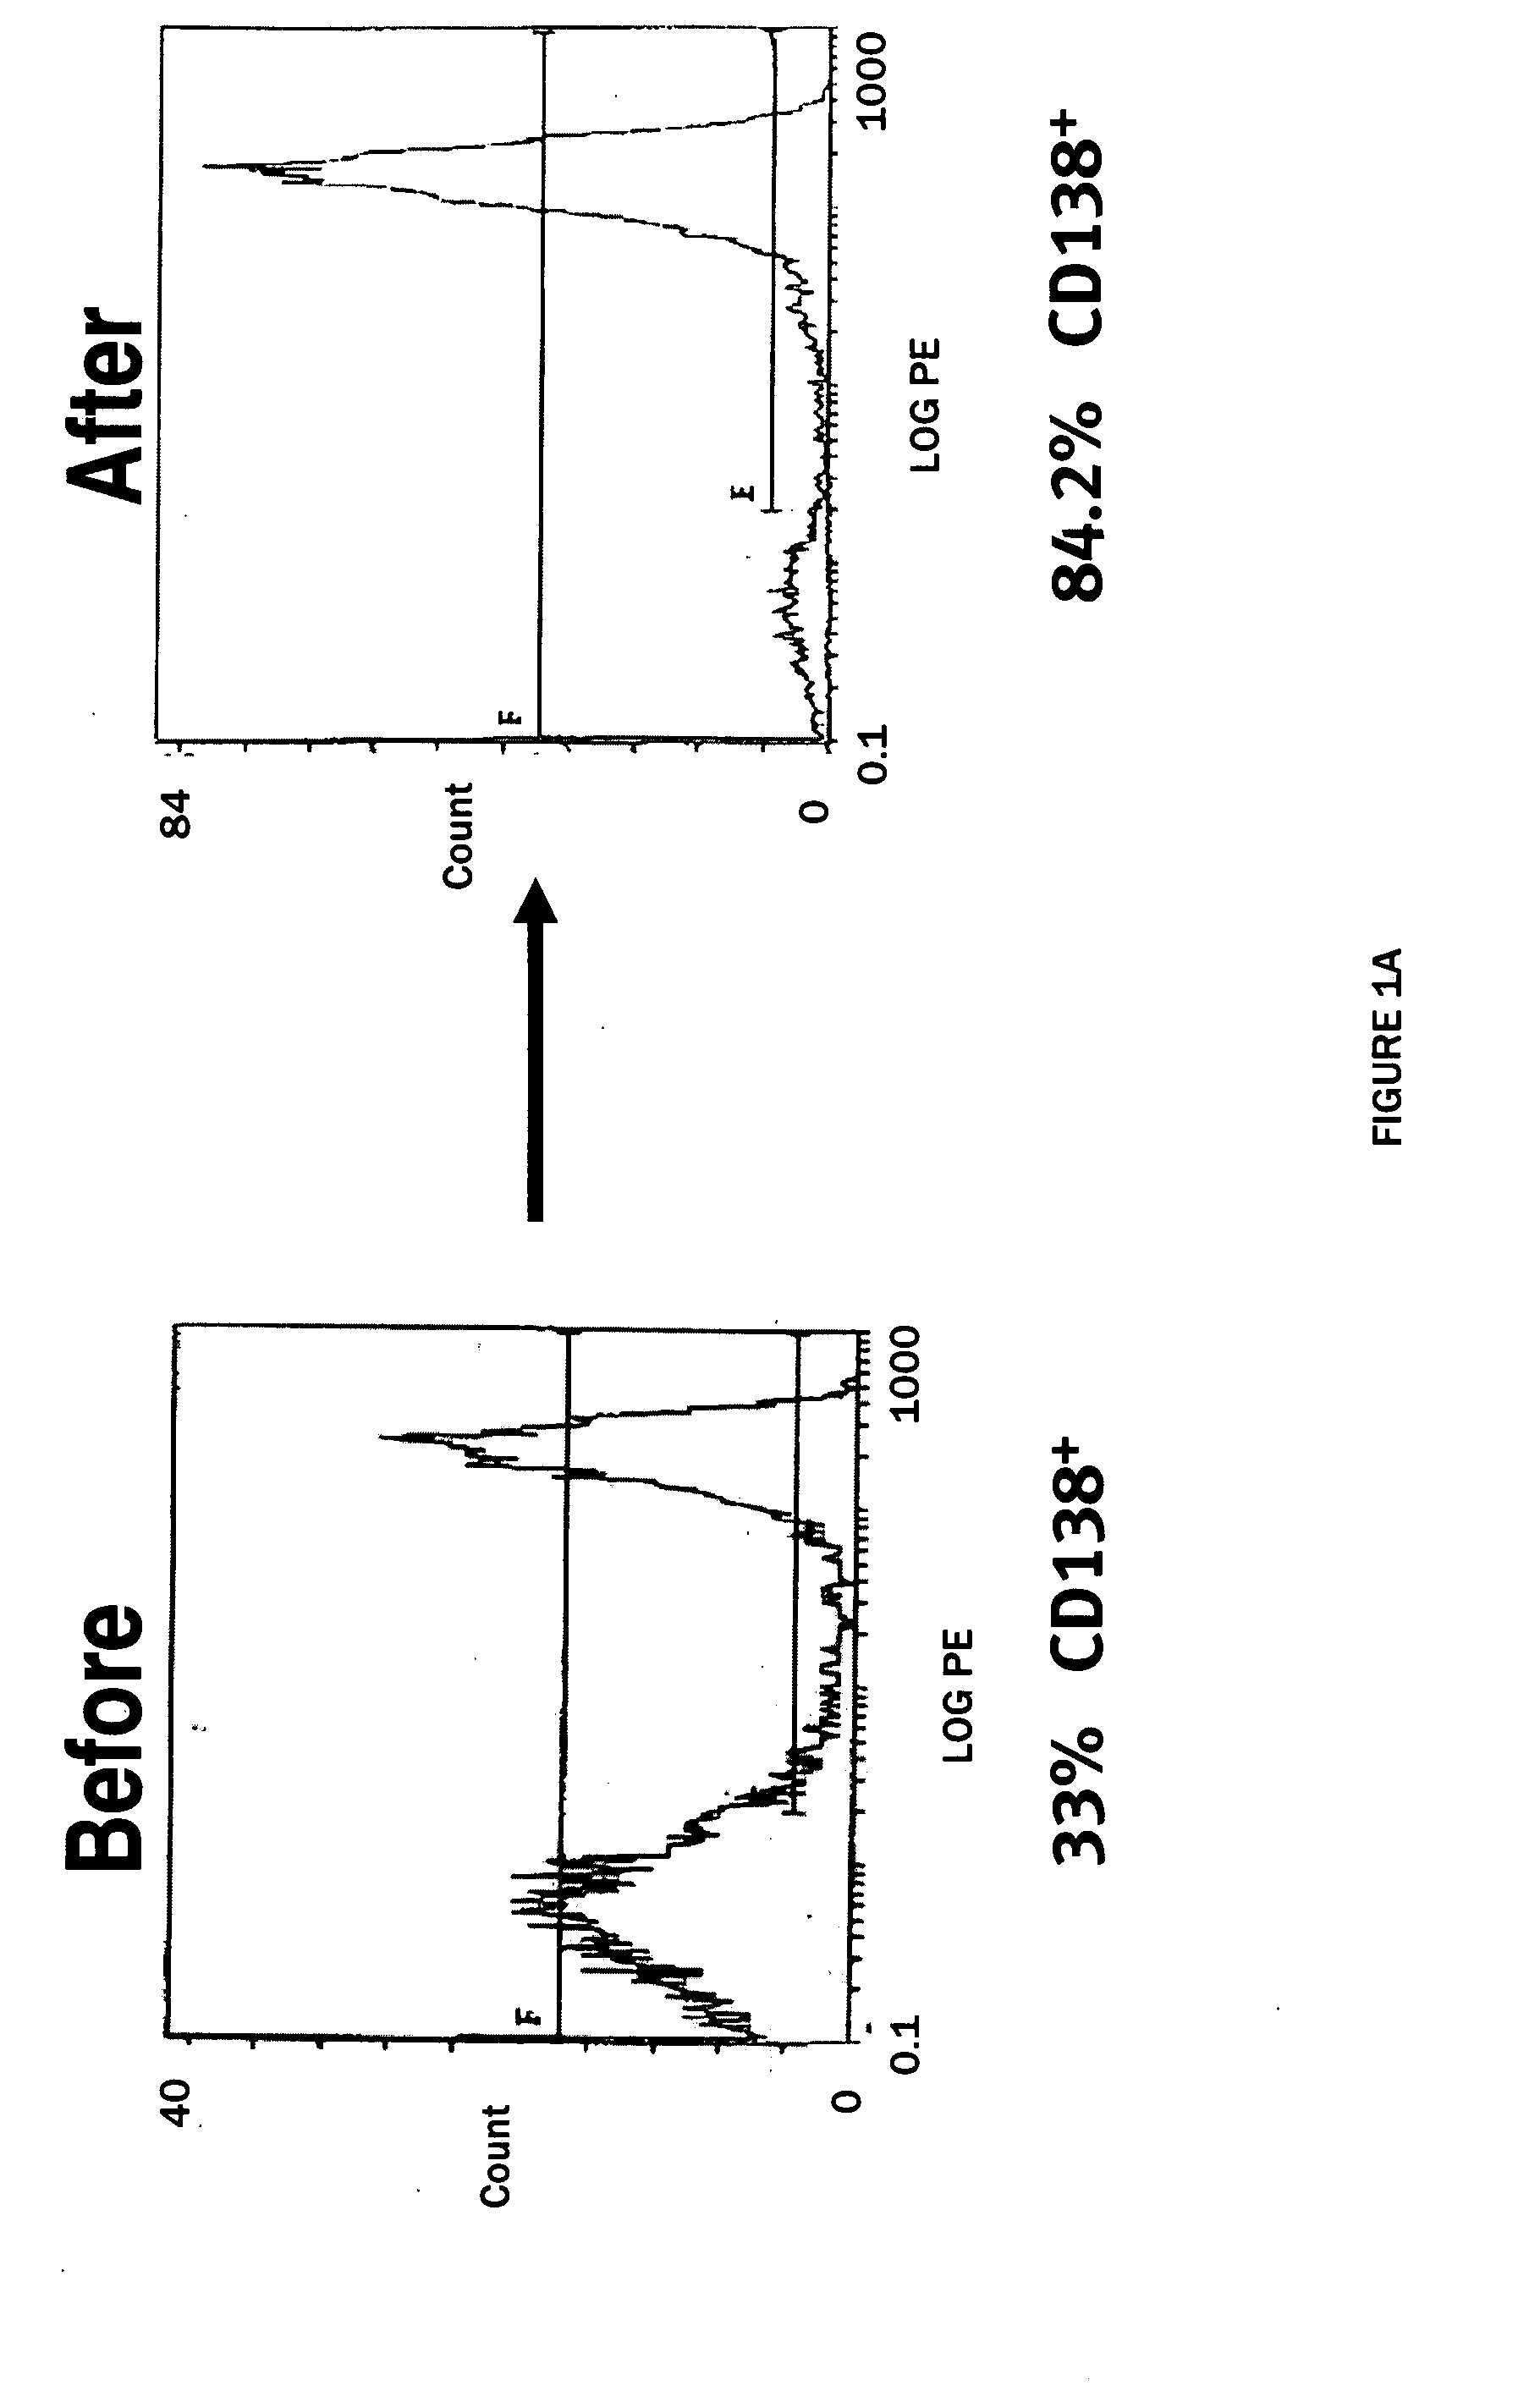 Methods for the identification, assessment, and treatment of patients with cancer therapy